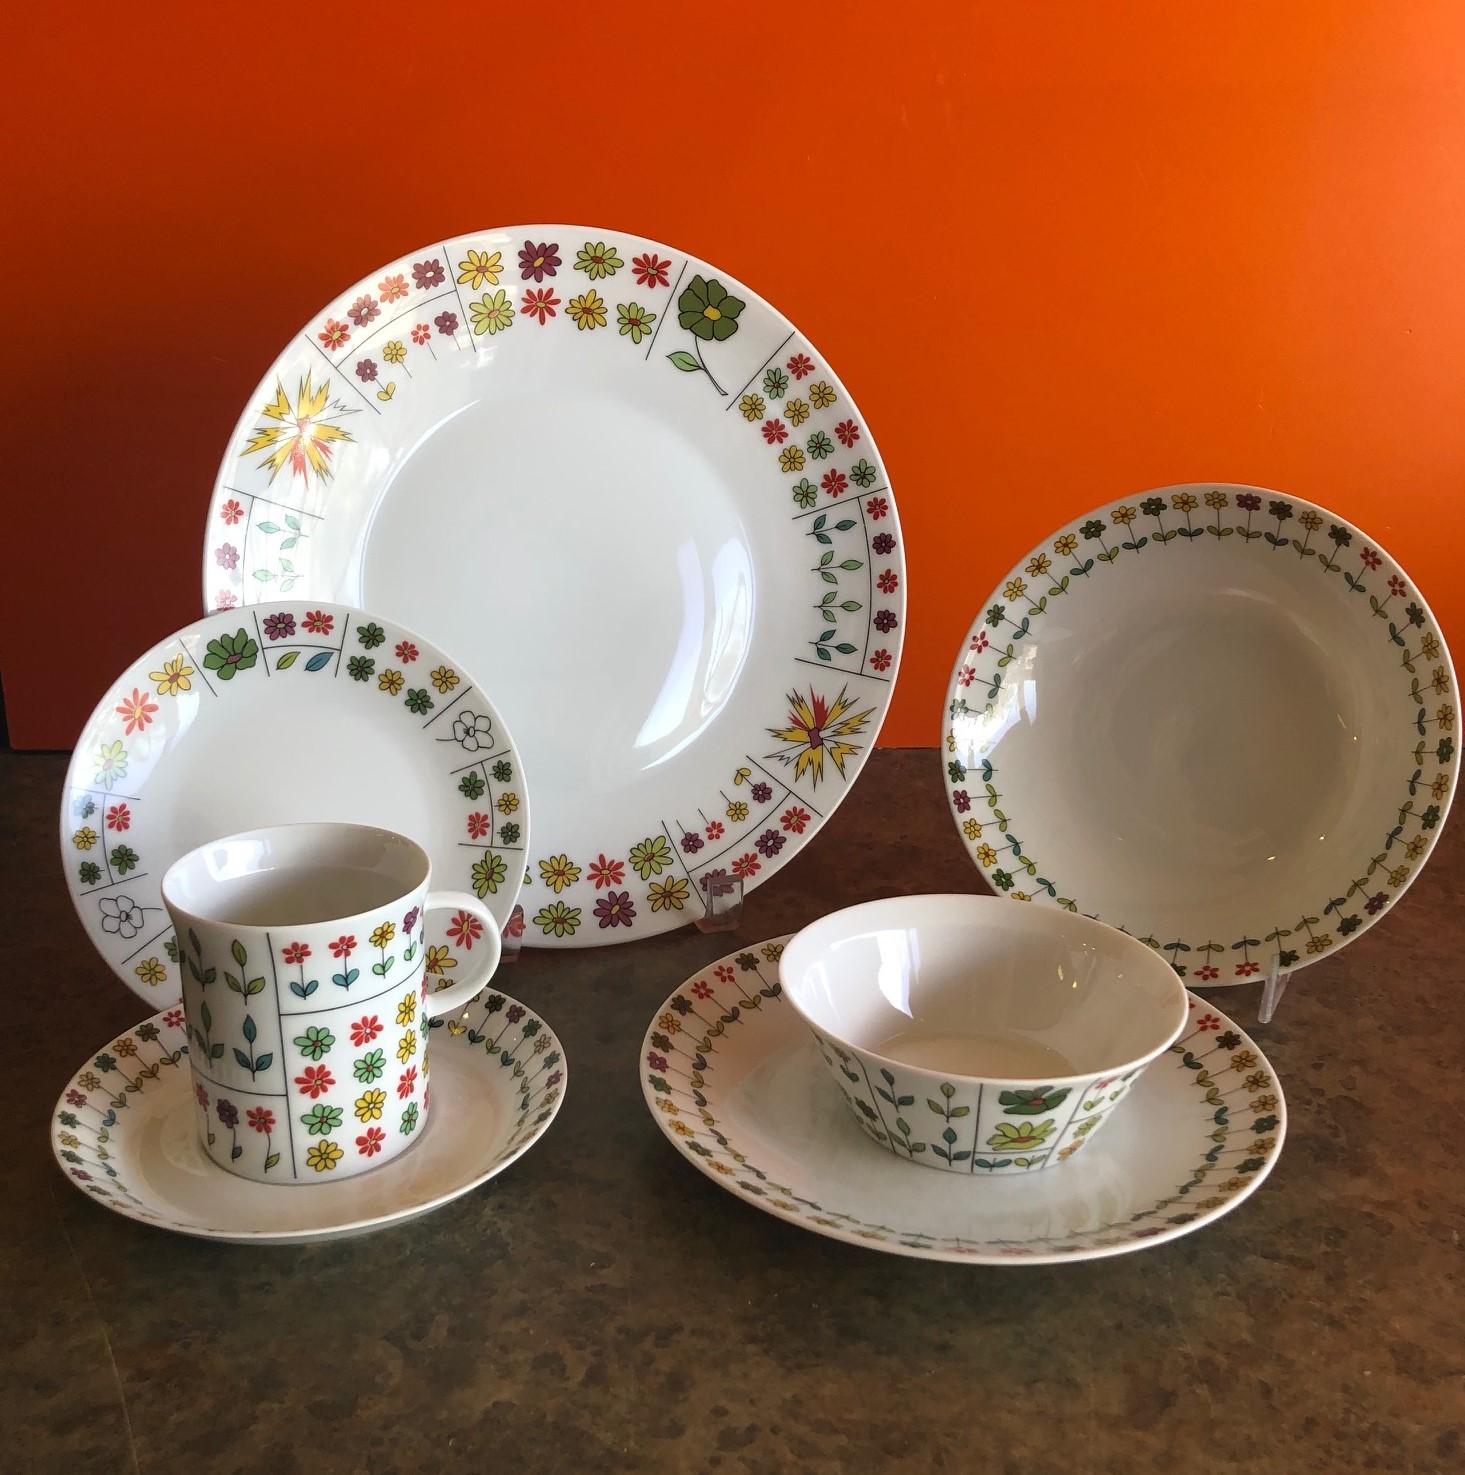 20th Century Collection of Piemonte Dinnerware by Emilio Pucci for Rosenthal Studio Line